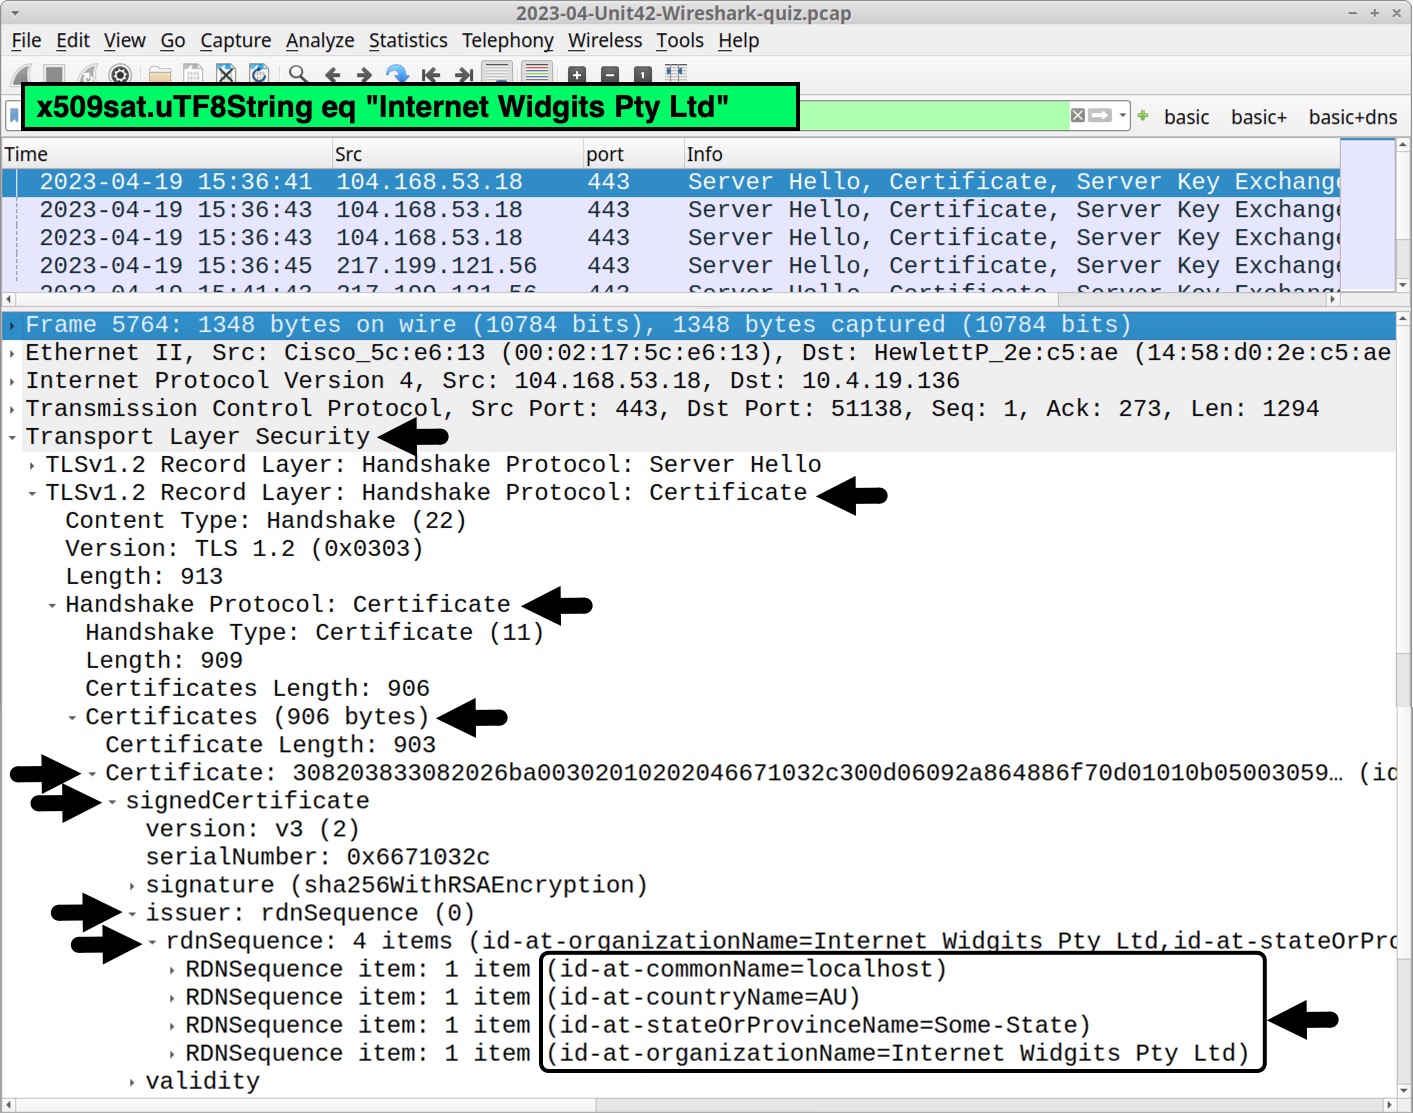 Image 15 is a Wireshark screenshot. Highlighted in green is the command to put into the search bar. The results, highlighted by arrows, are the transport layer security, the certificate, including size, and the issuer of the certificate. Highlighted in a black box are the IDs that showed in the Xubuntu terminal.